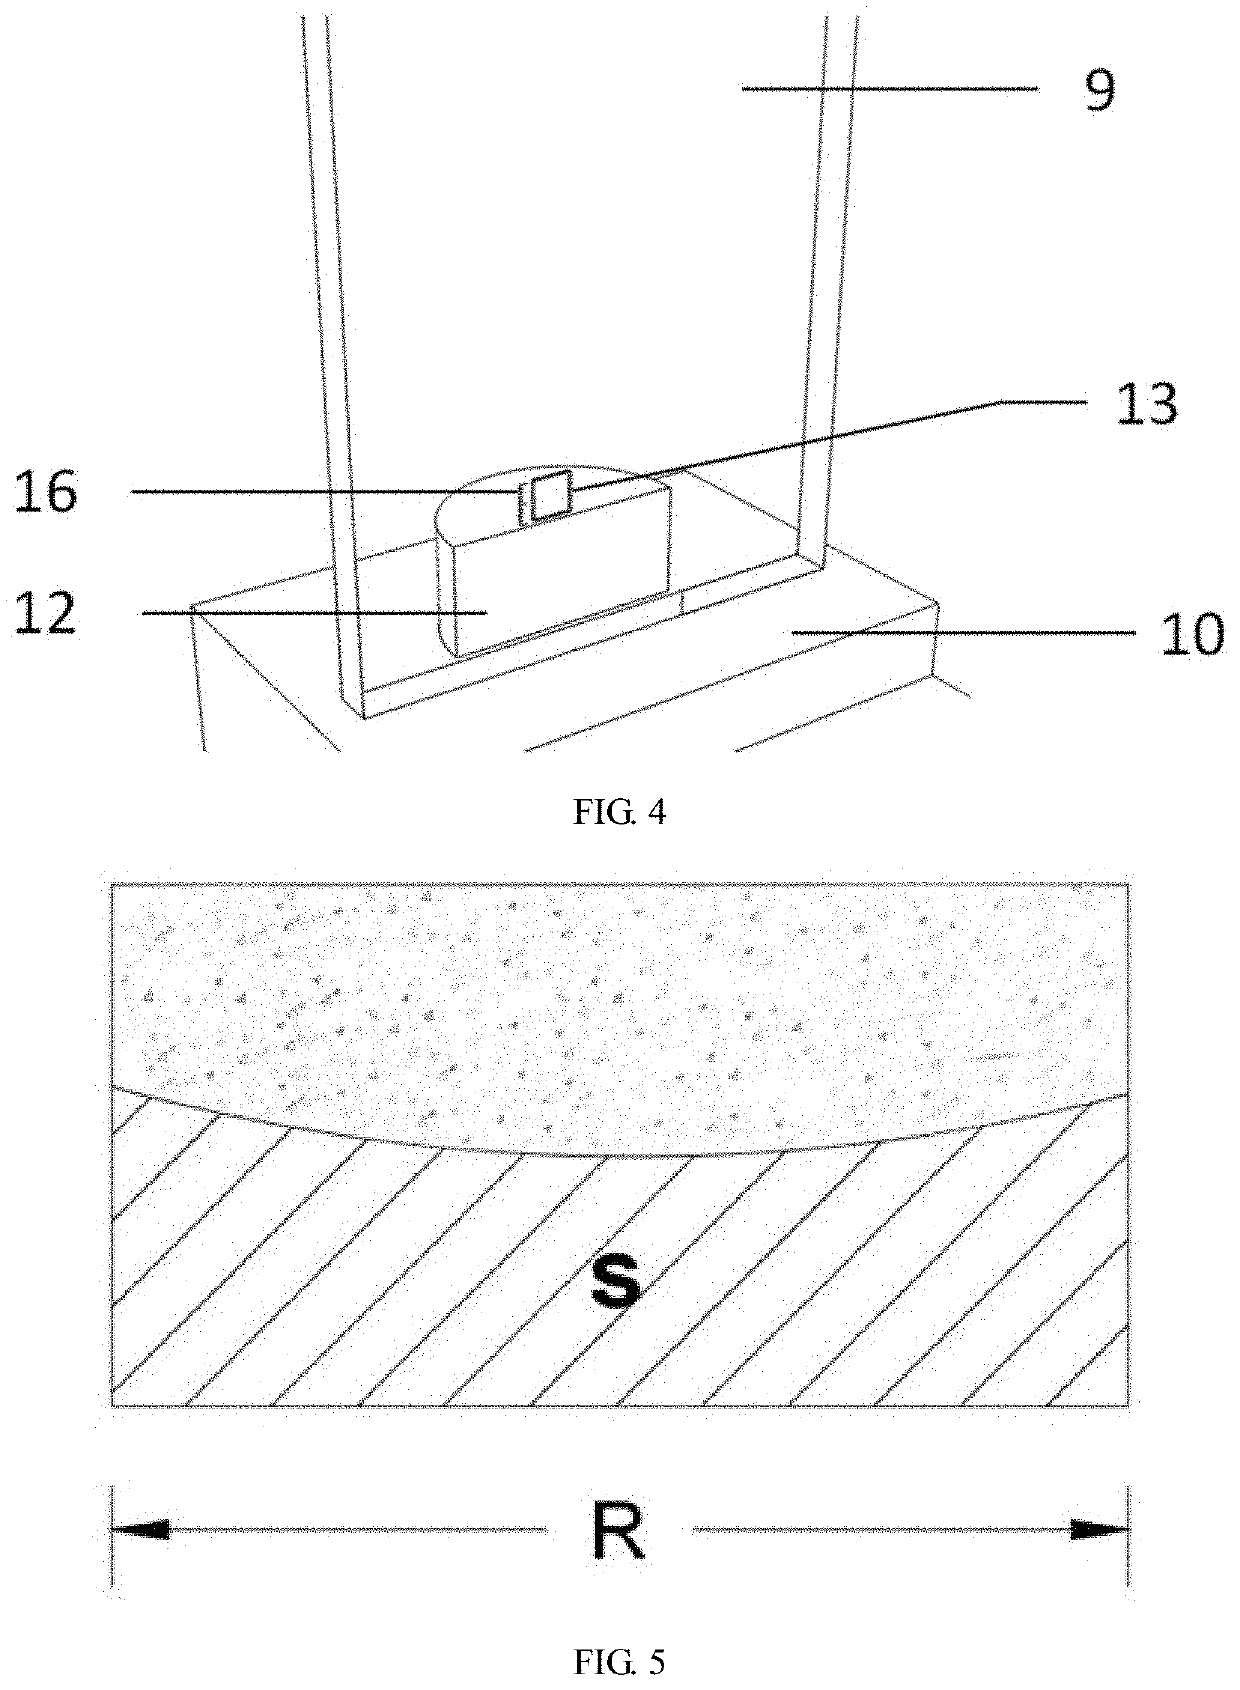 Image acquisition device and measuring method for geometric parameters of specific developing area on concrete test blocks